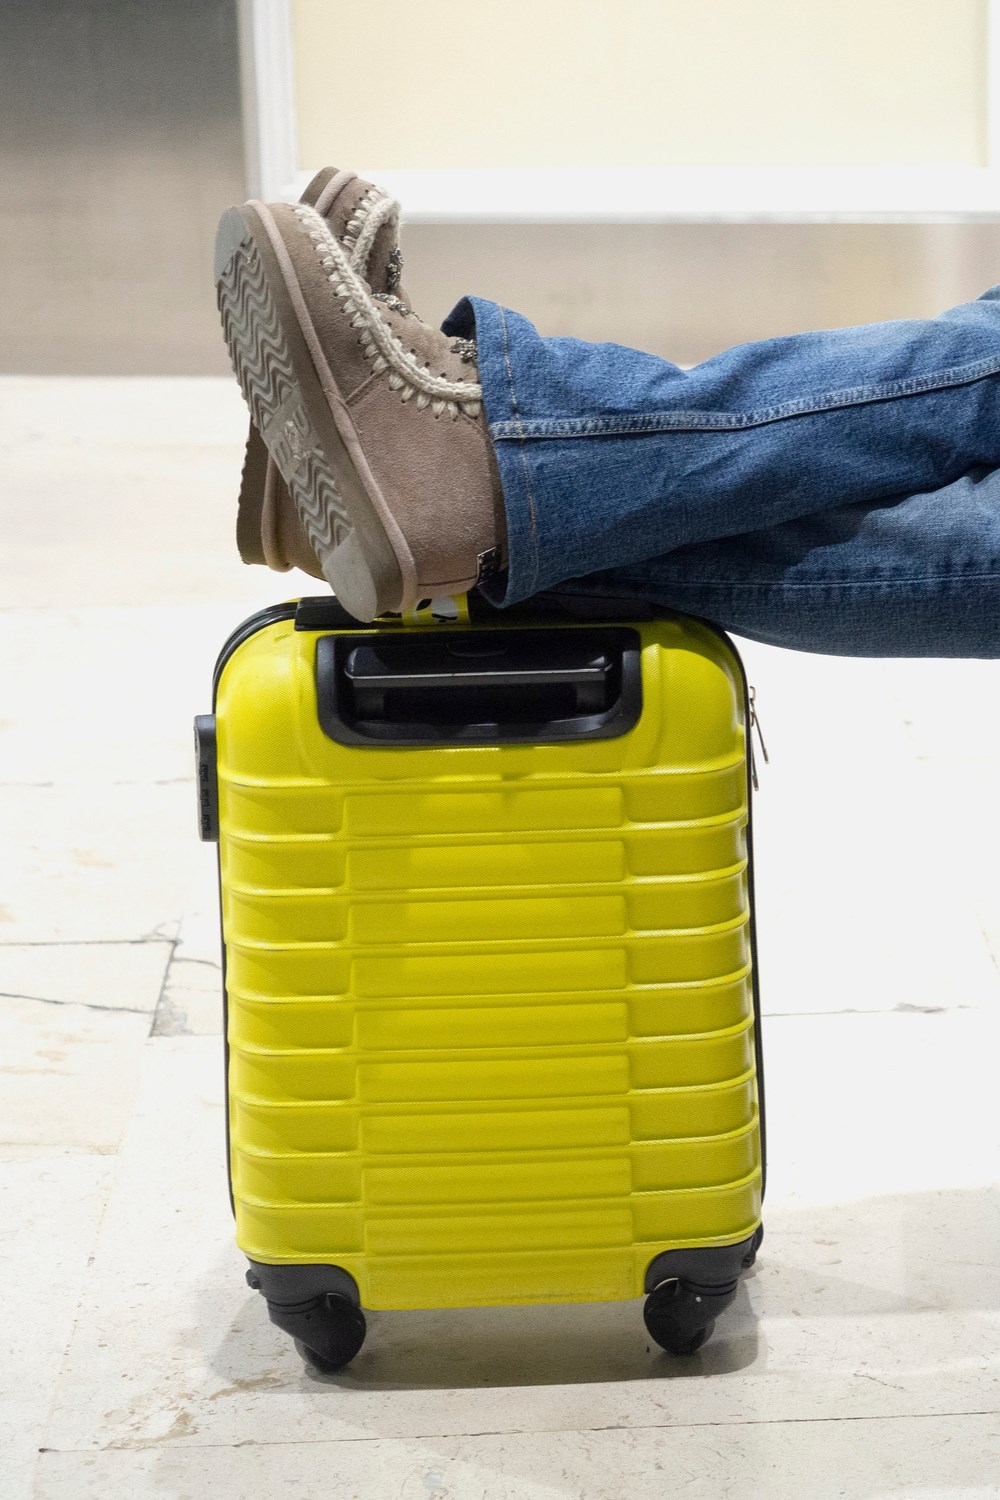 These Are The Shoes You Should Never Wear To The Airport | Better Homes ...